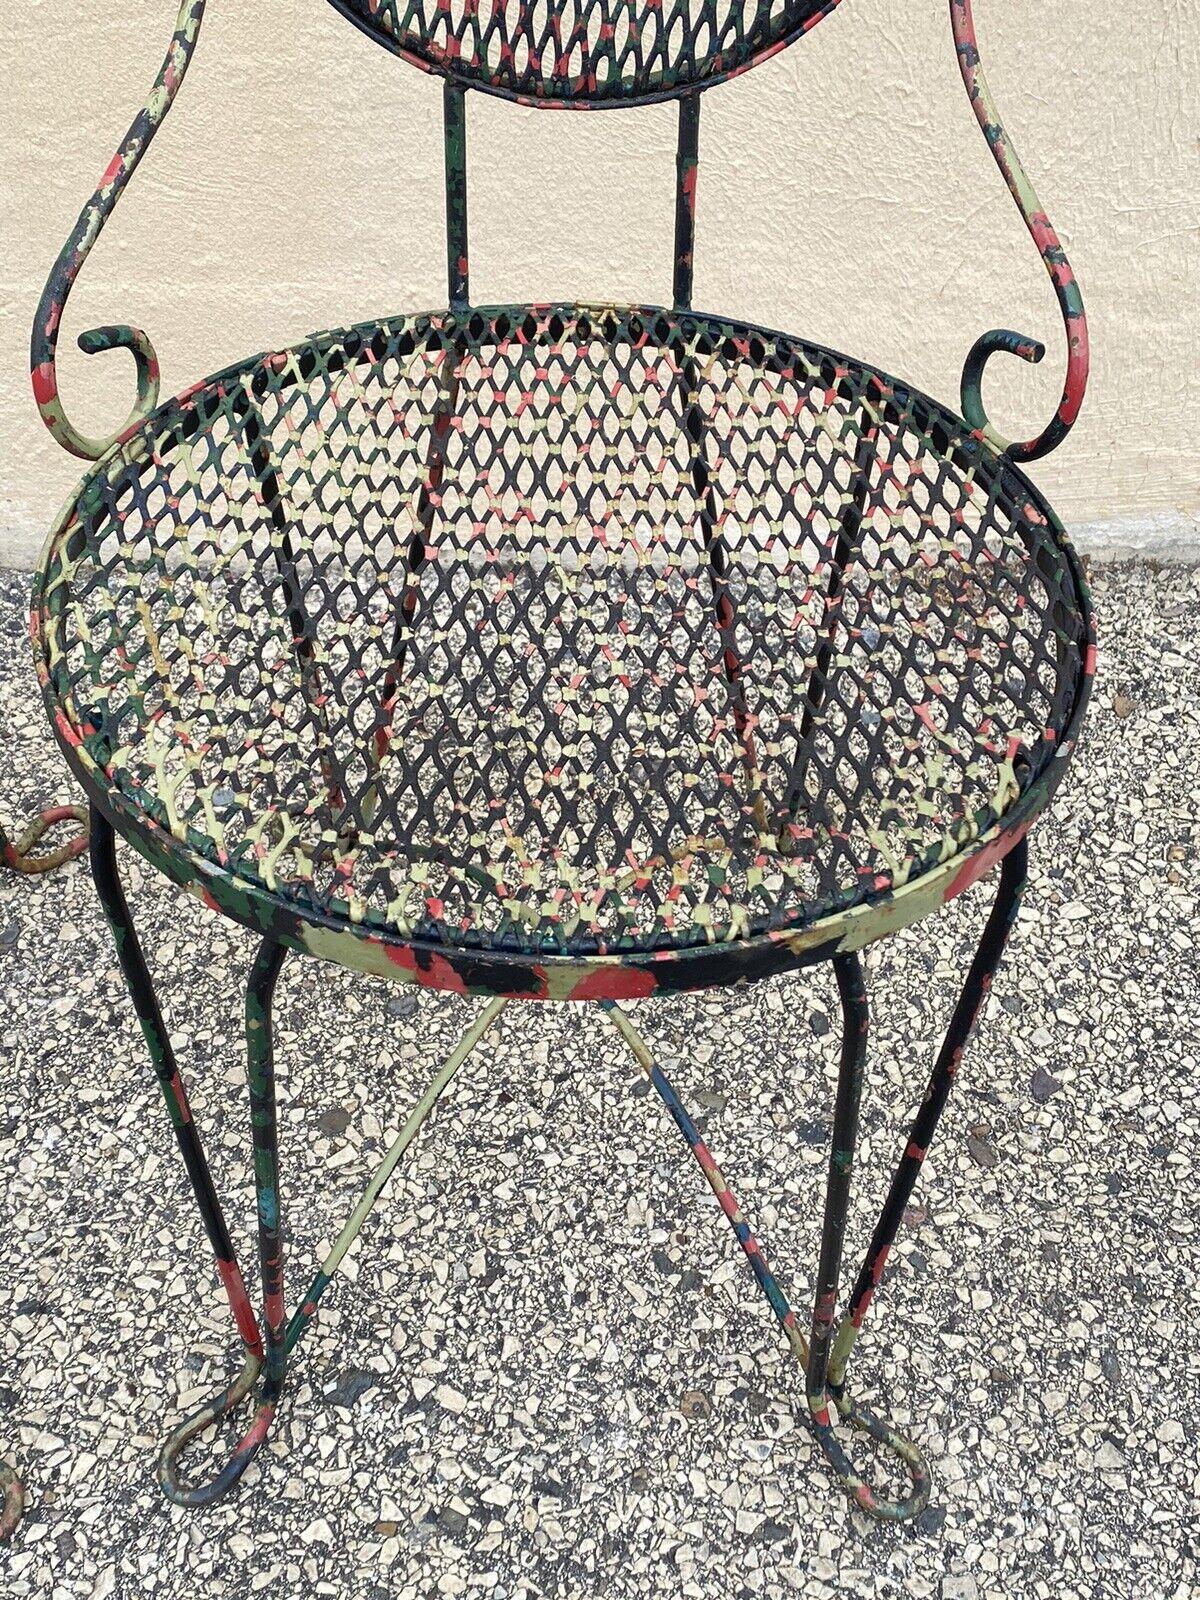 Vintage Victorian Style Small Wrought Iron Camo Paint Garden Patio Chairs Set 4 For Sale 4